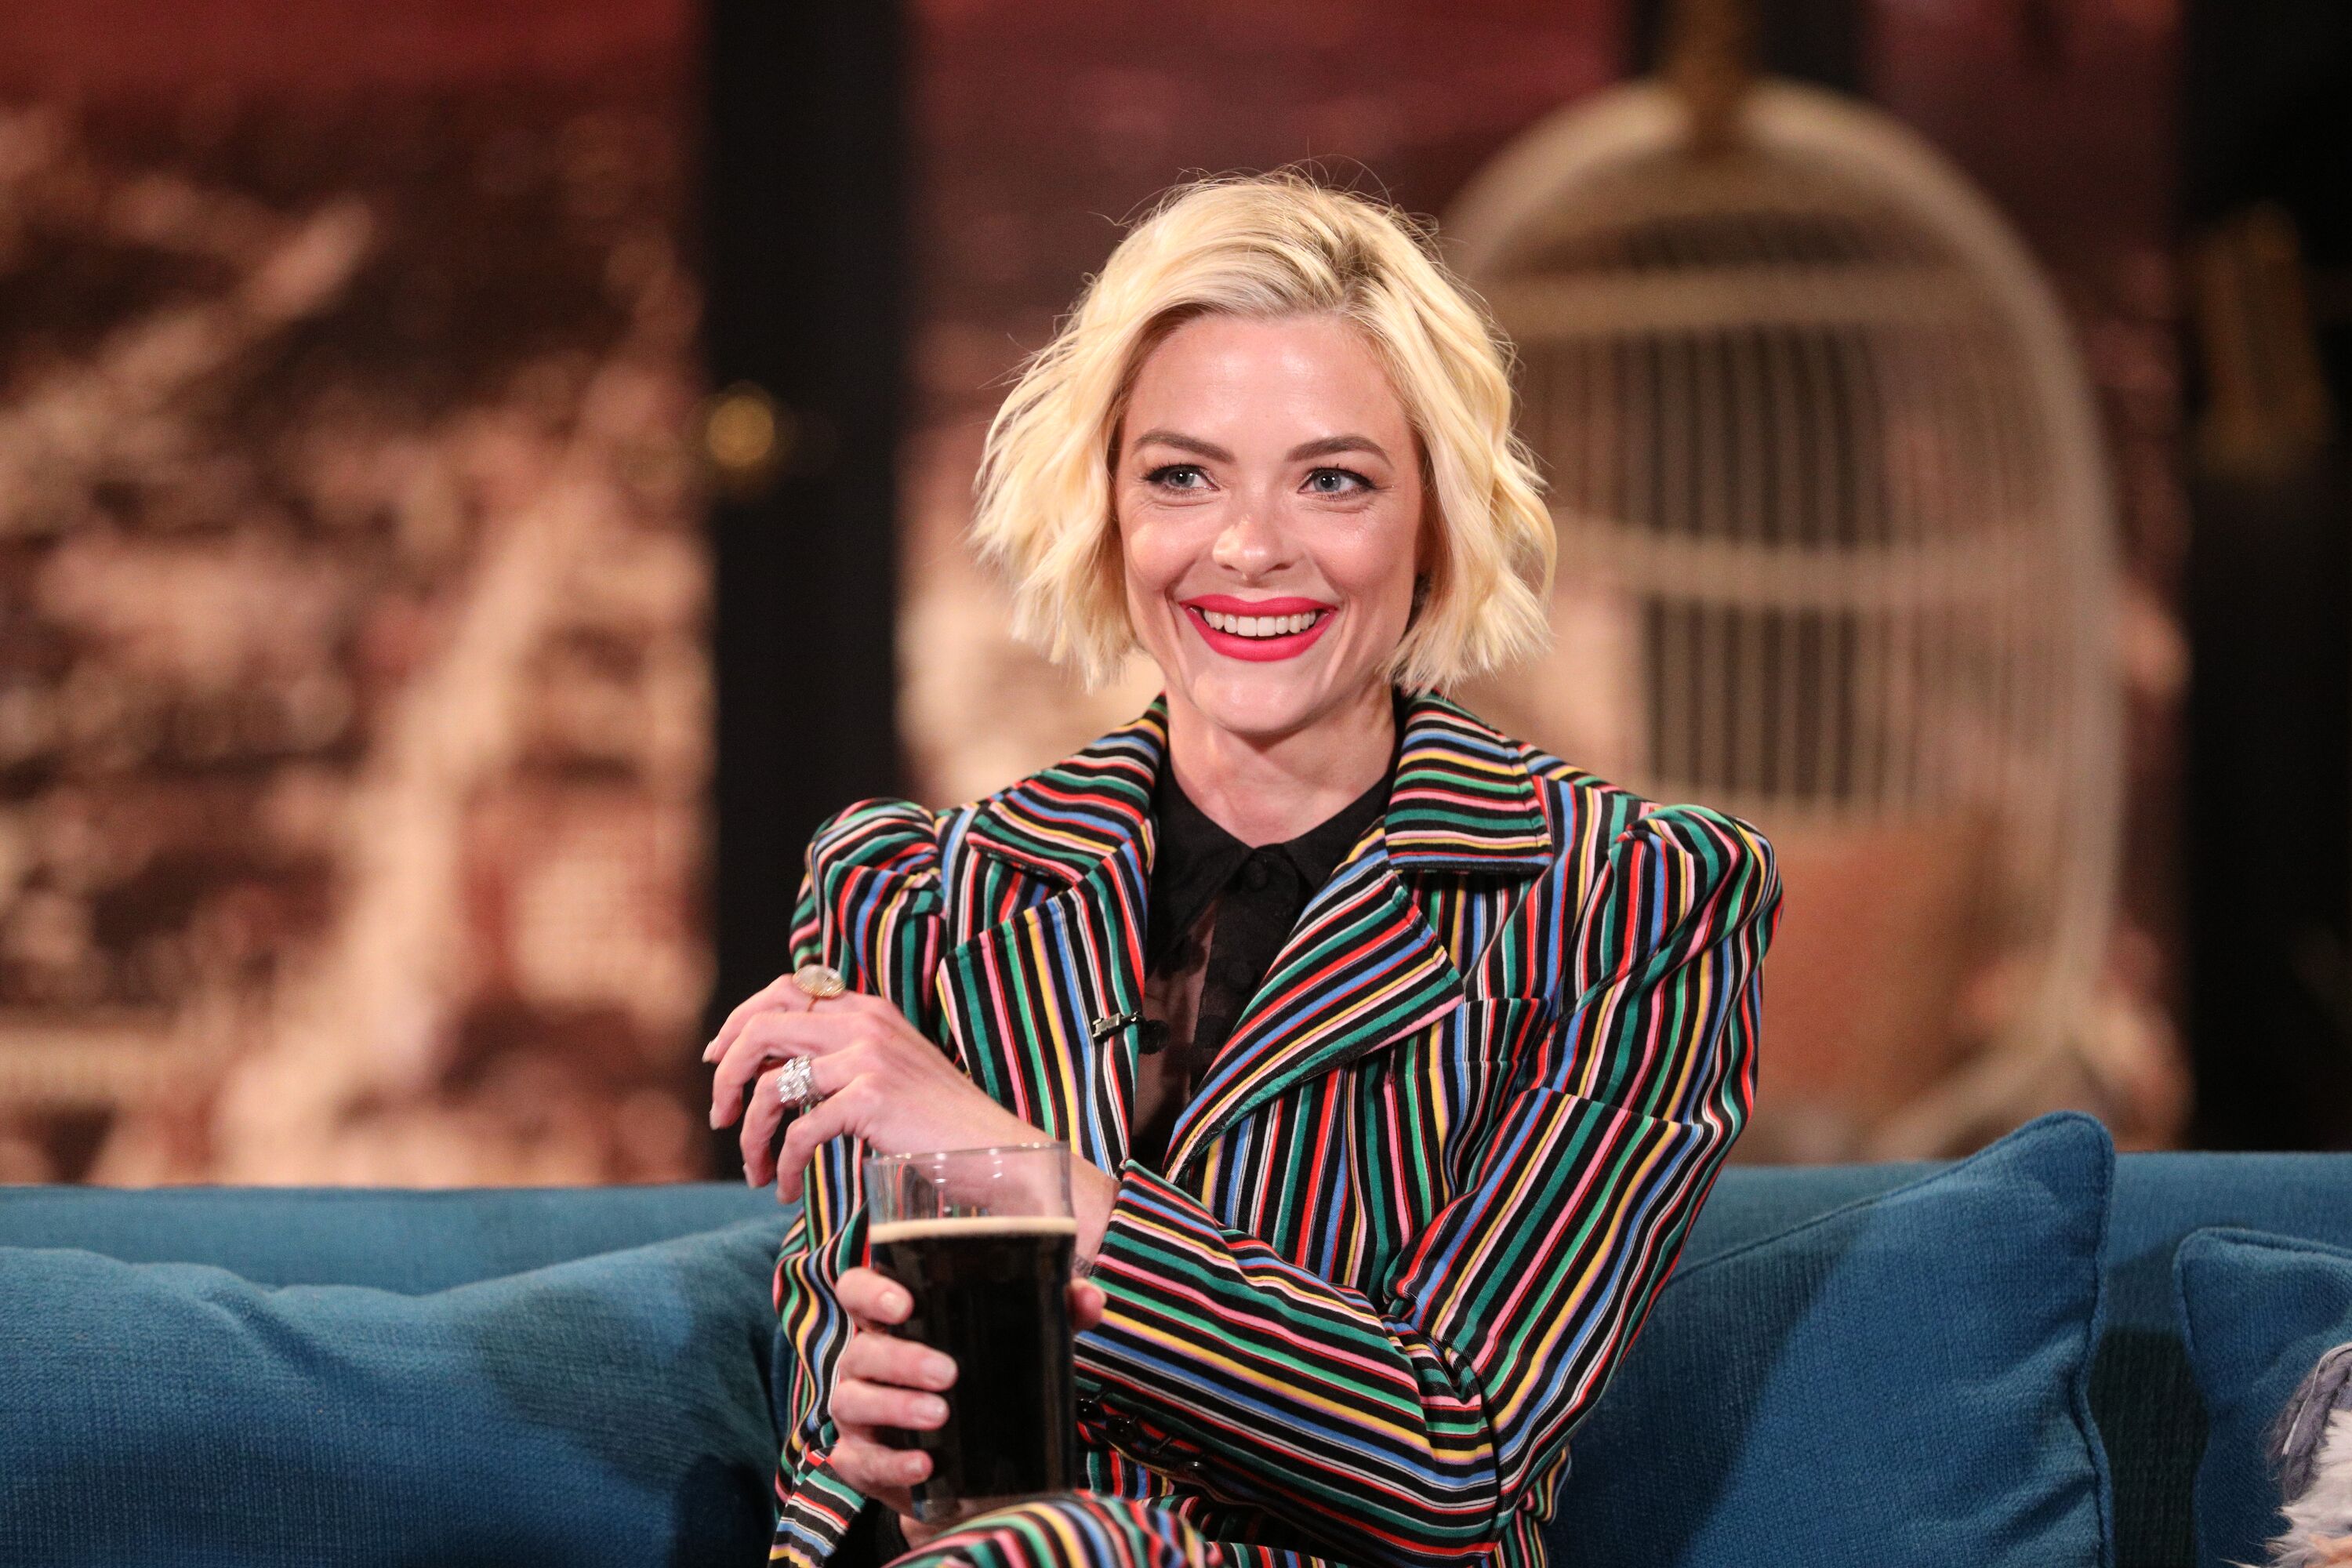 Actress Jaime King on the set of talk show "Busy Tonight" | Source: Getty Images